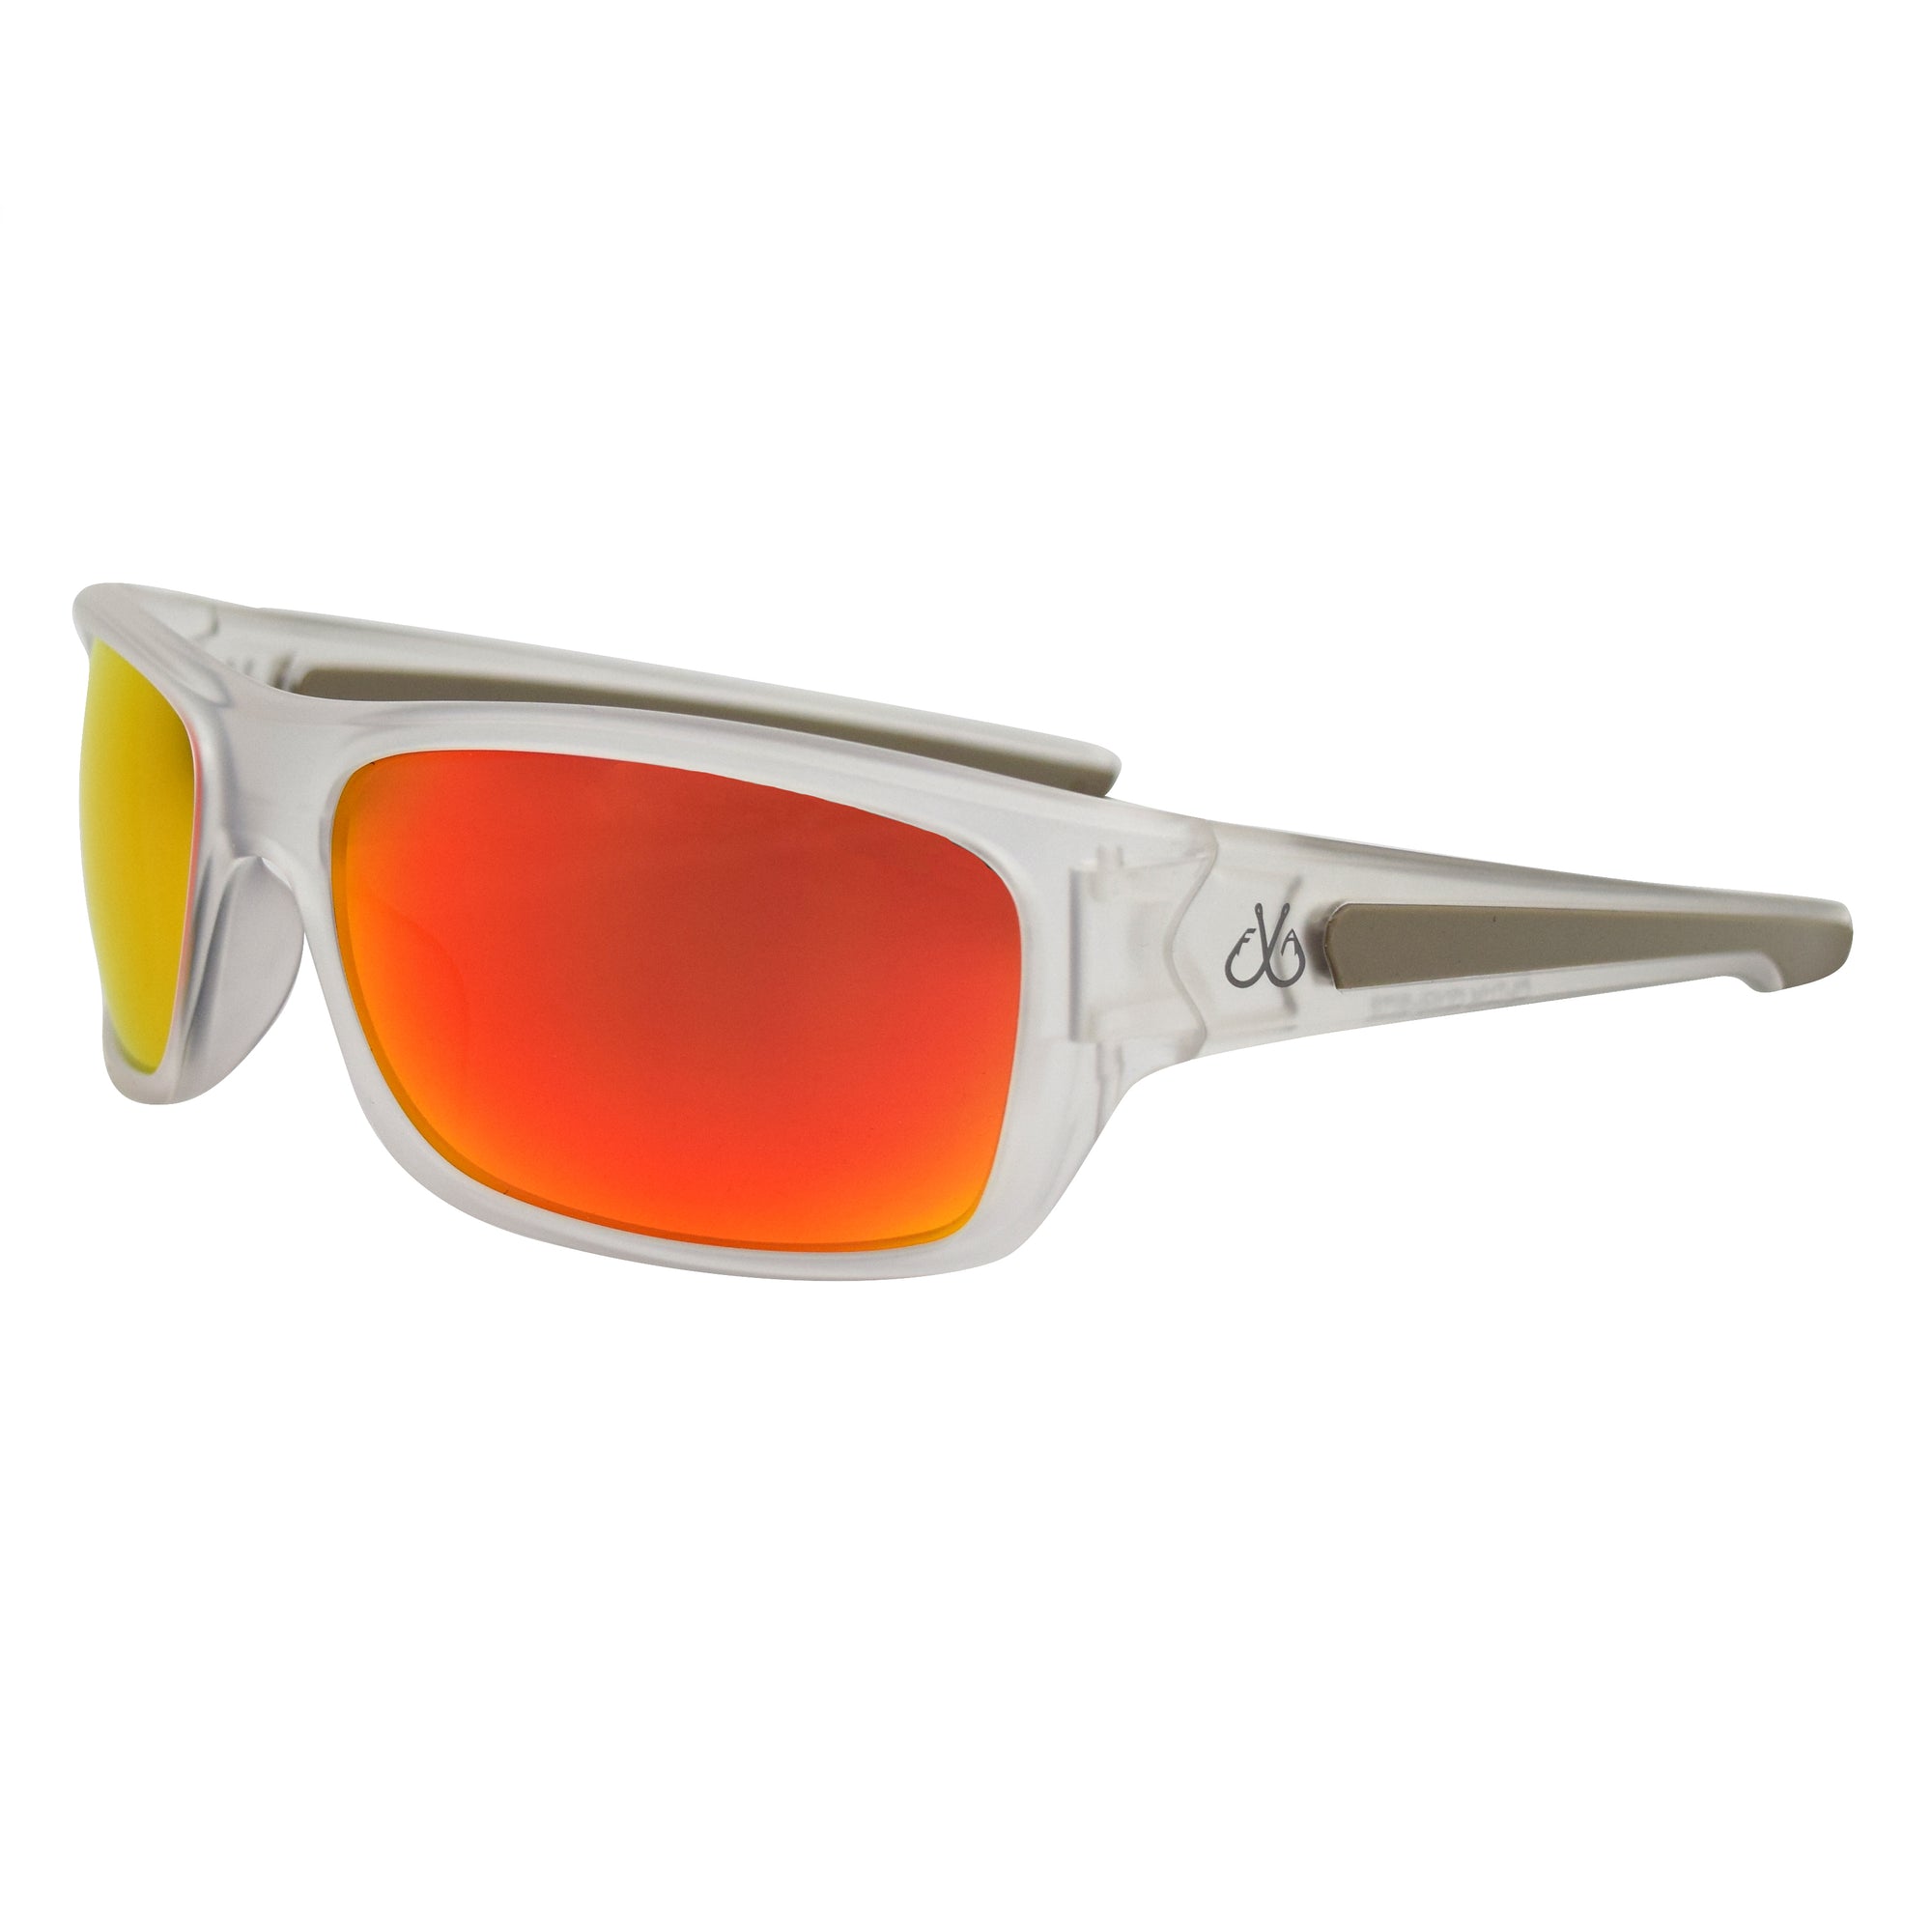 Mystic Polarized Sunglasses - Filthy Anglers